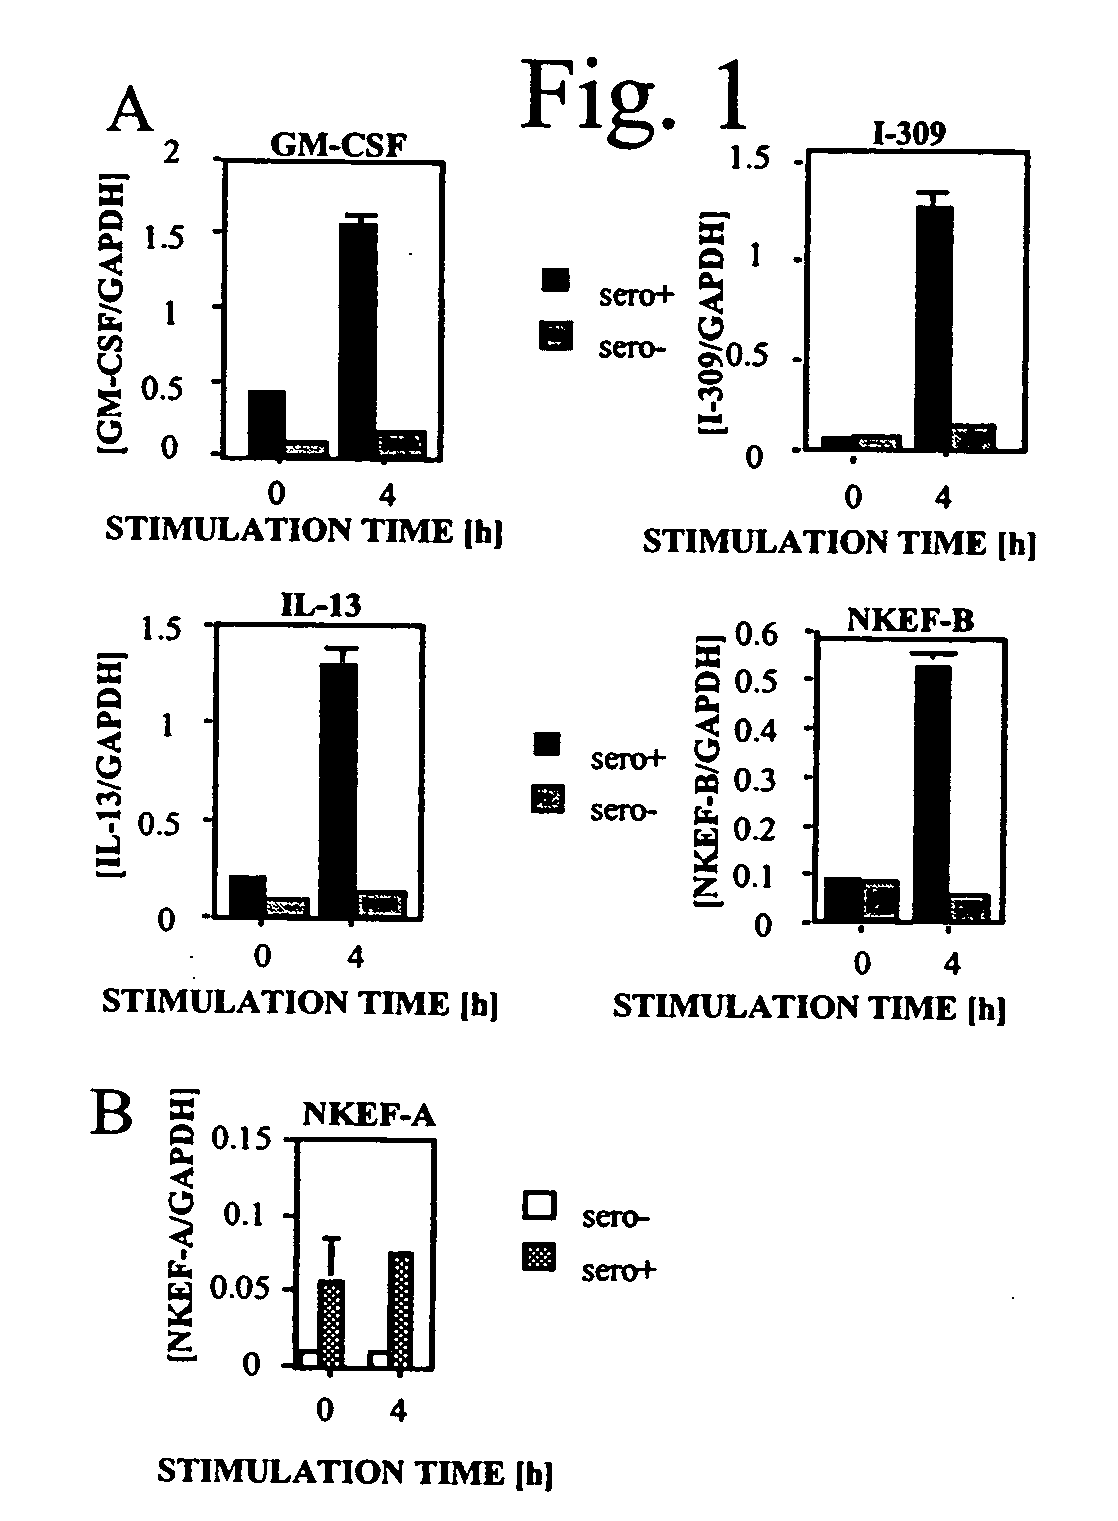 Peroxiredoxin drugs for treatment of HIV-1 infection and methods of use thereof